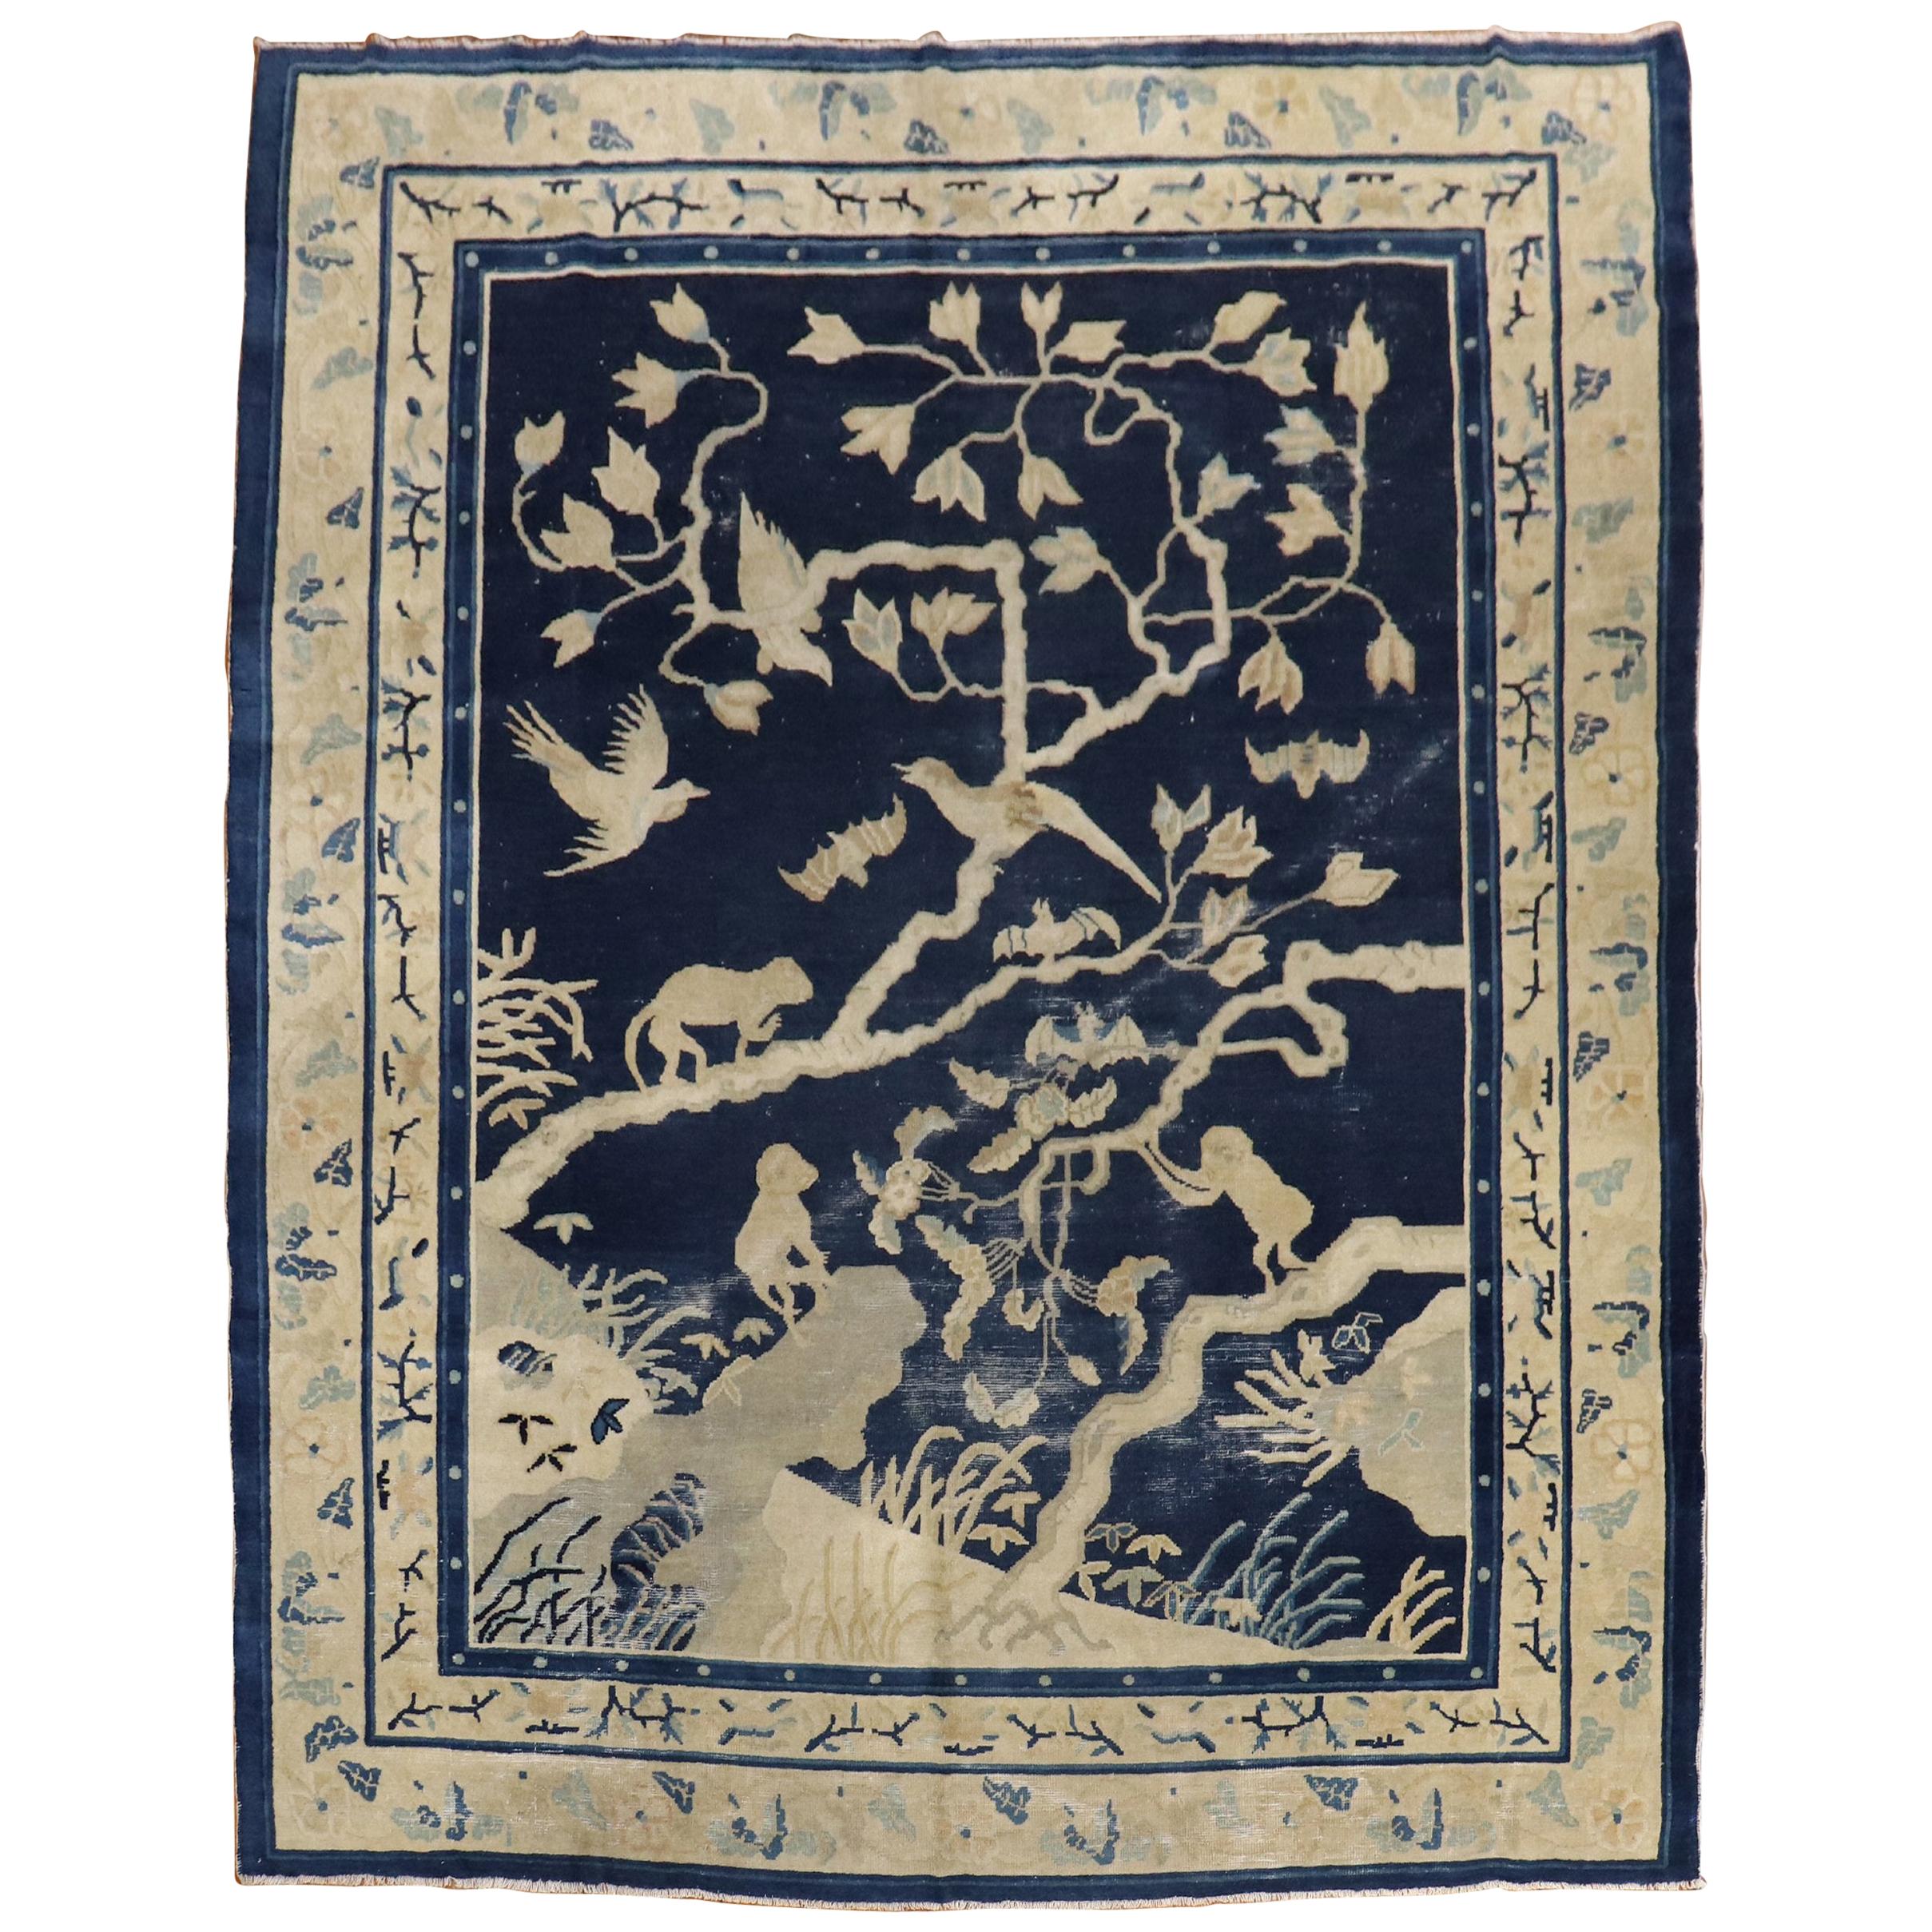 19th Century Monkey Pictorial Chinese Rug